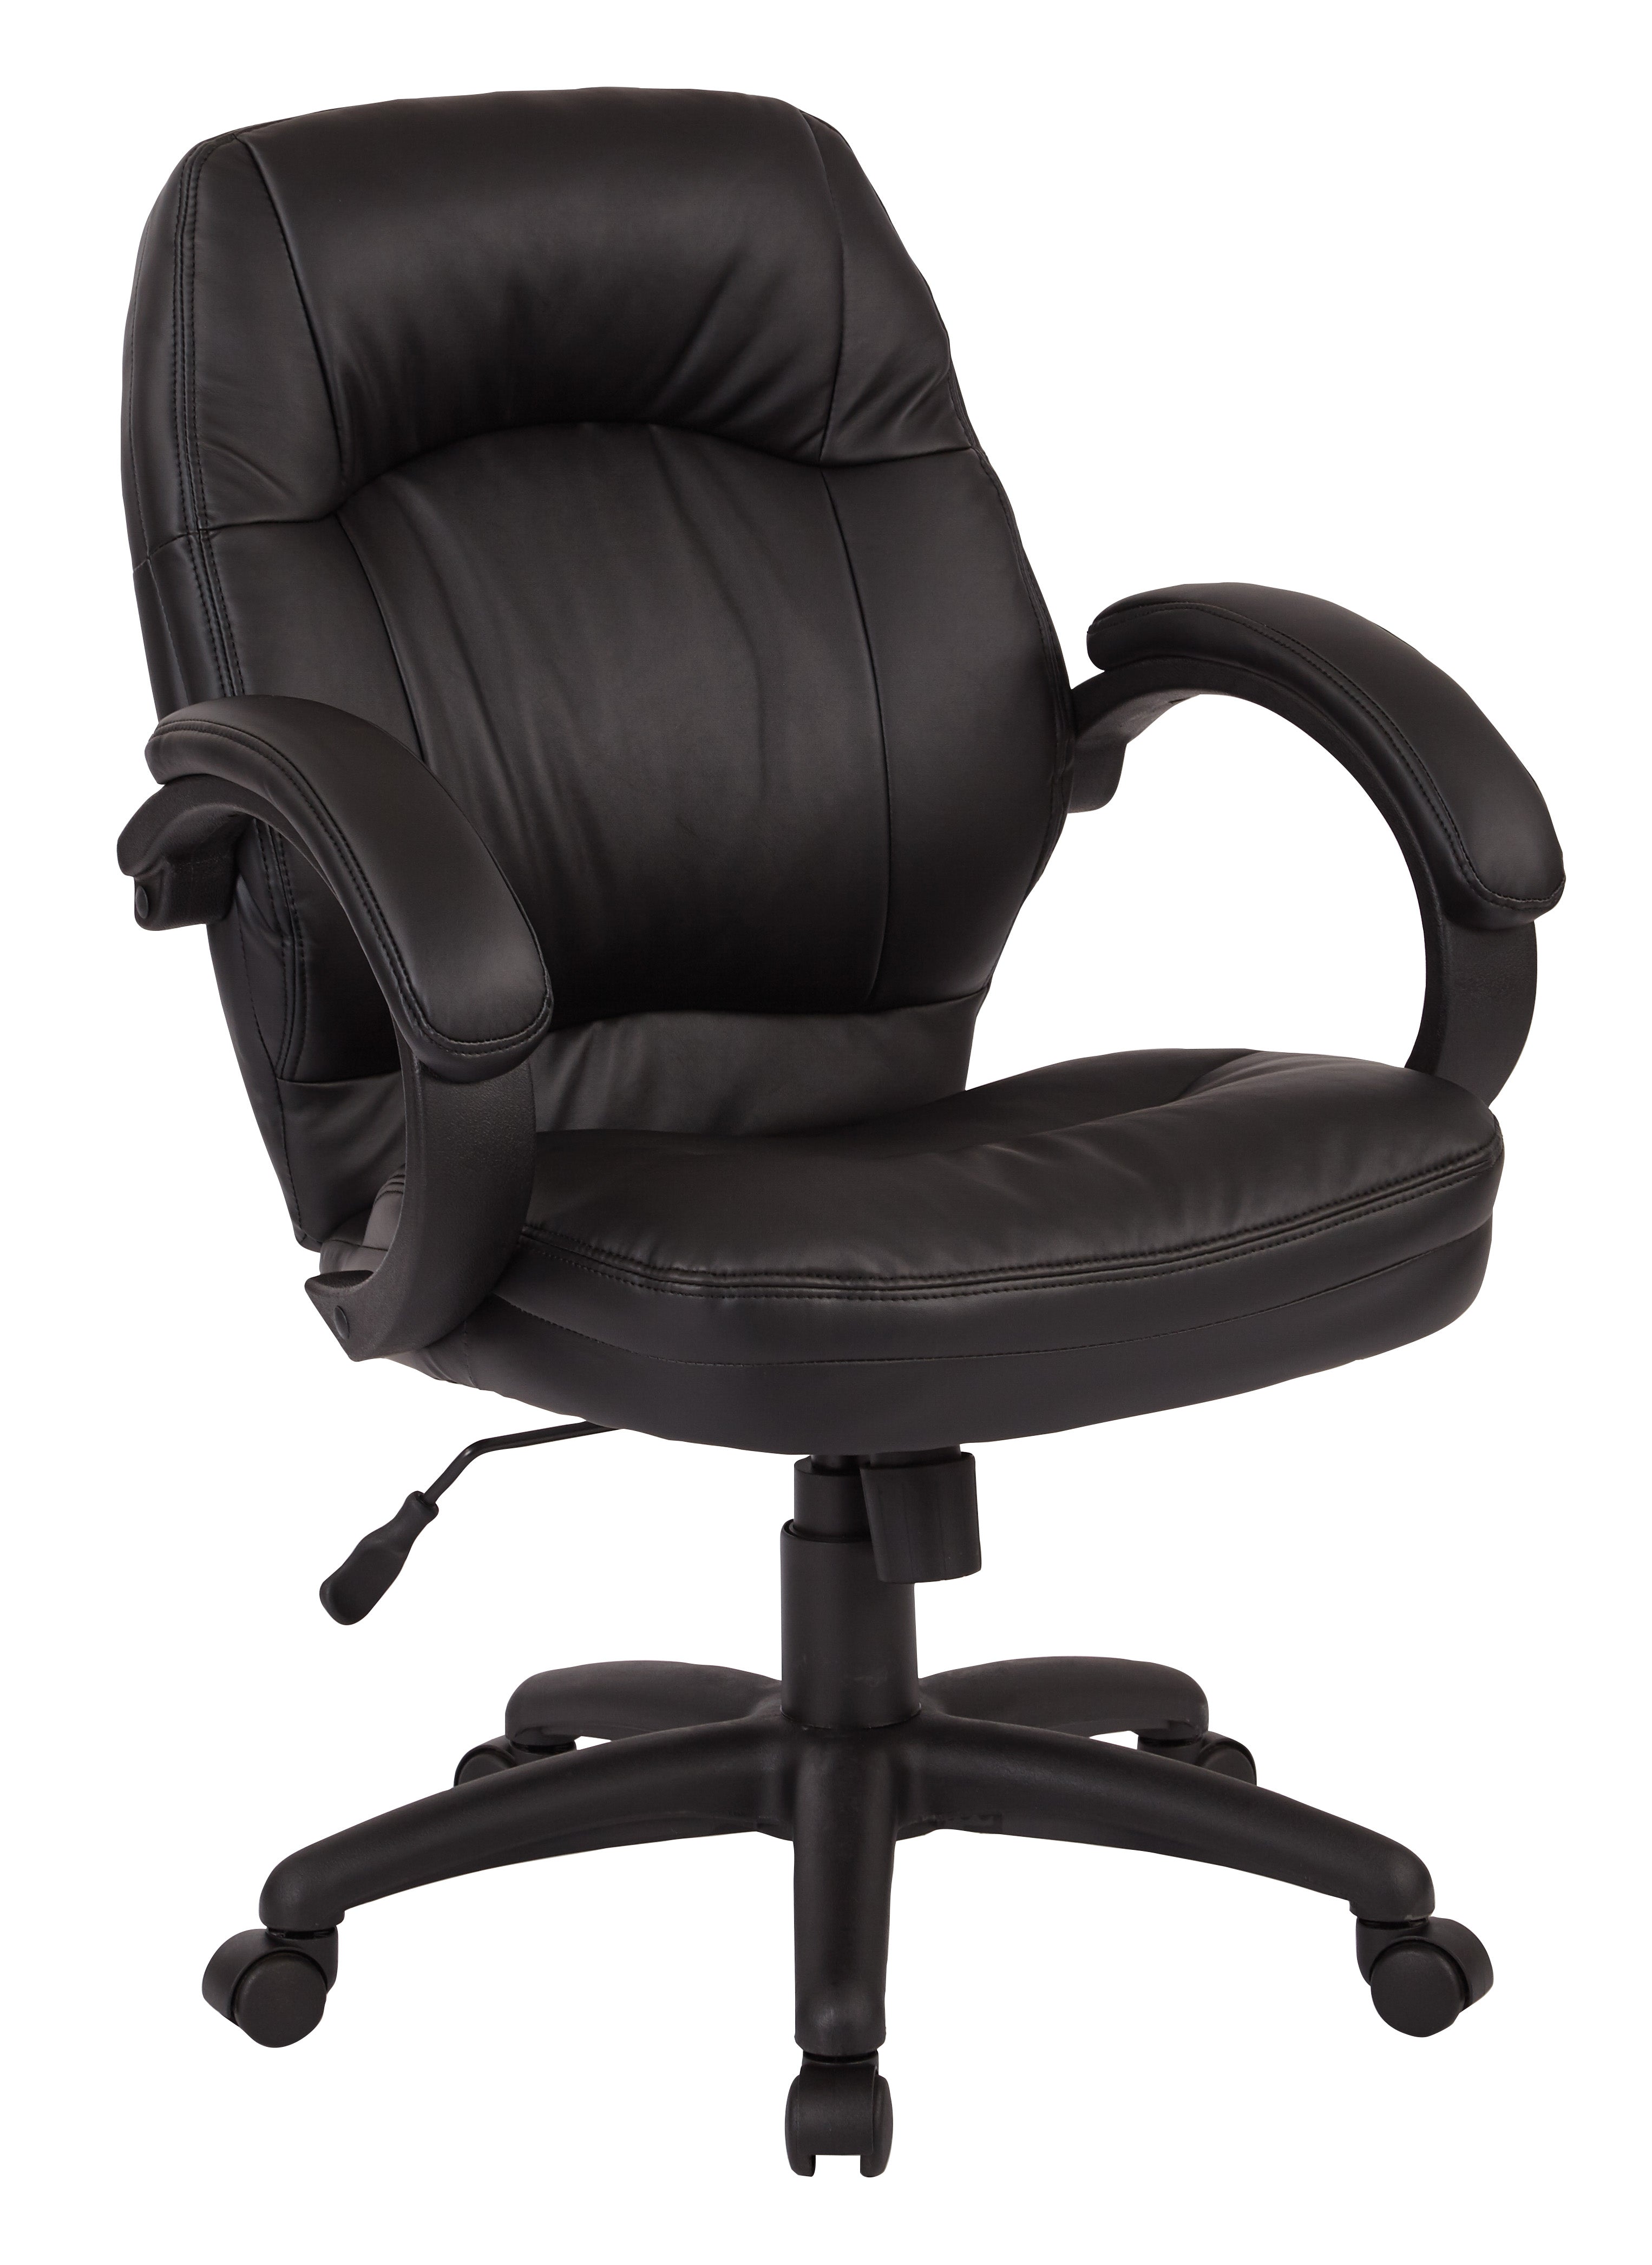 Deluxe Black Managers Chair